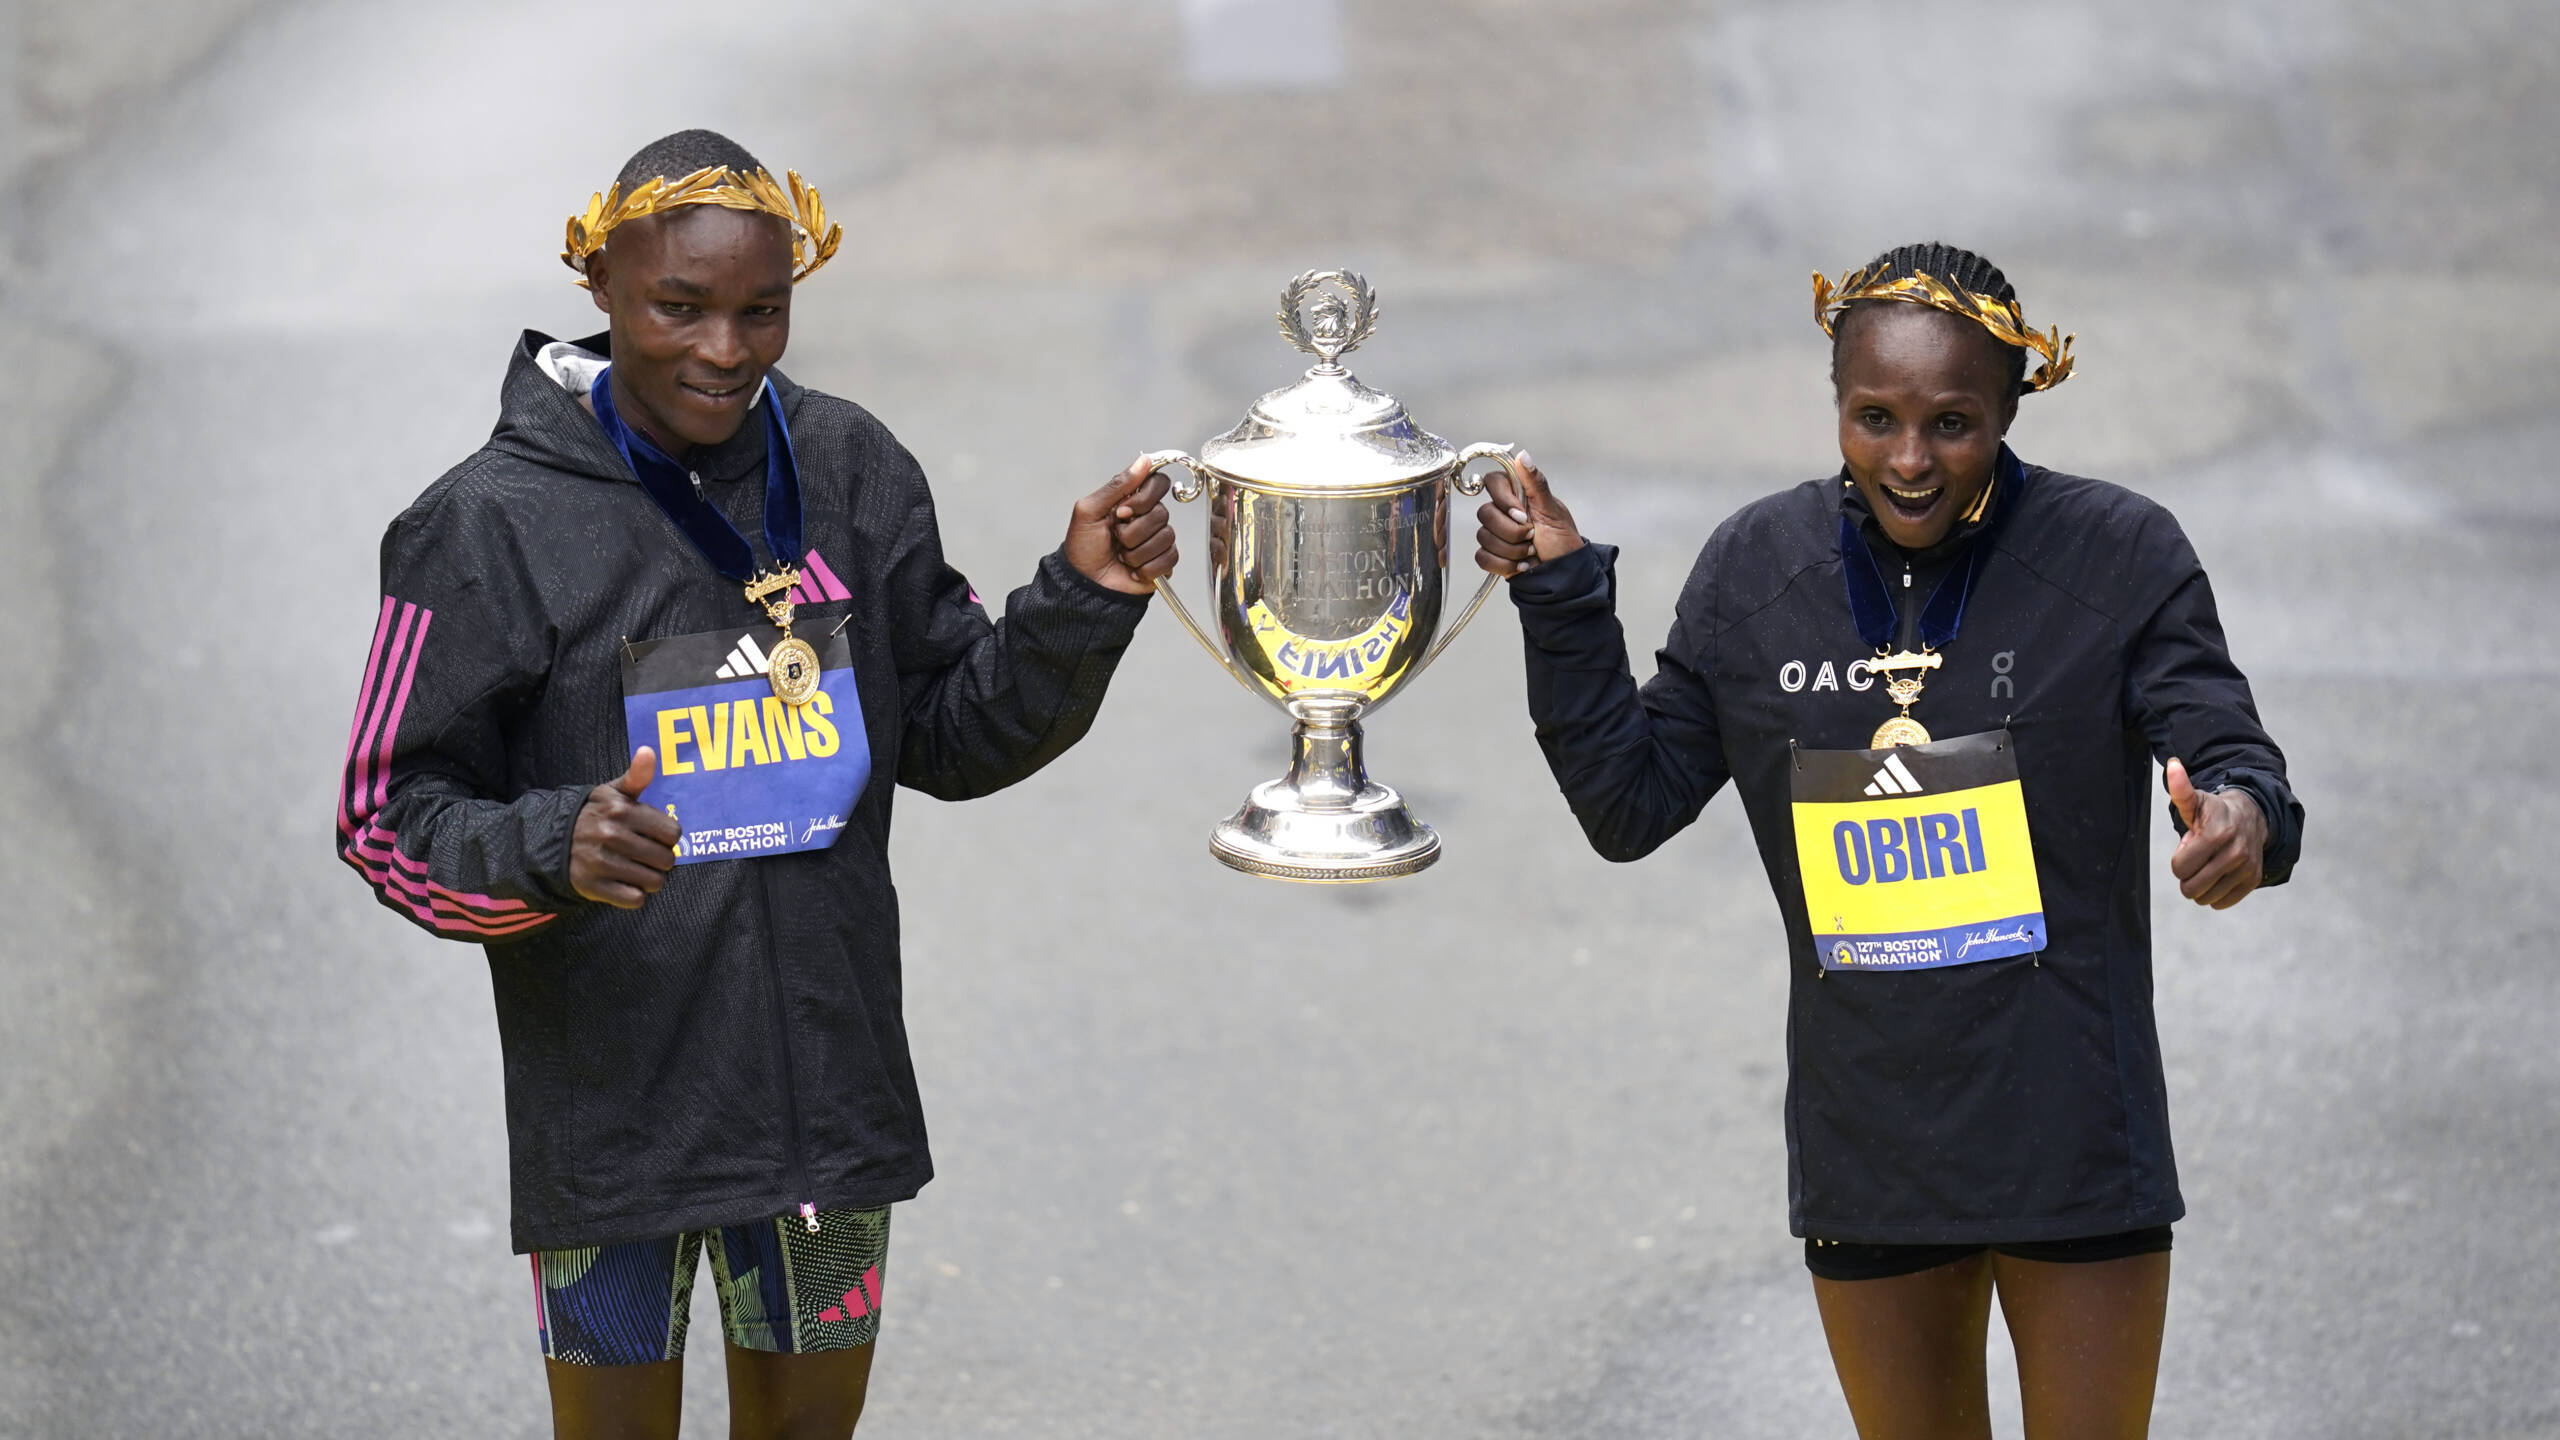 Kenya found itself on top of the podiums for both the Men’s and Women’s sections of the 127th Boston Marathon, as Evans Chebet and Hellen Obiri claimed their respective victories.